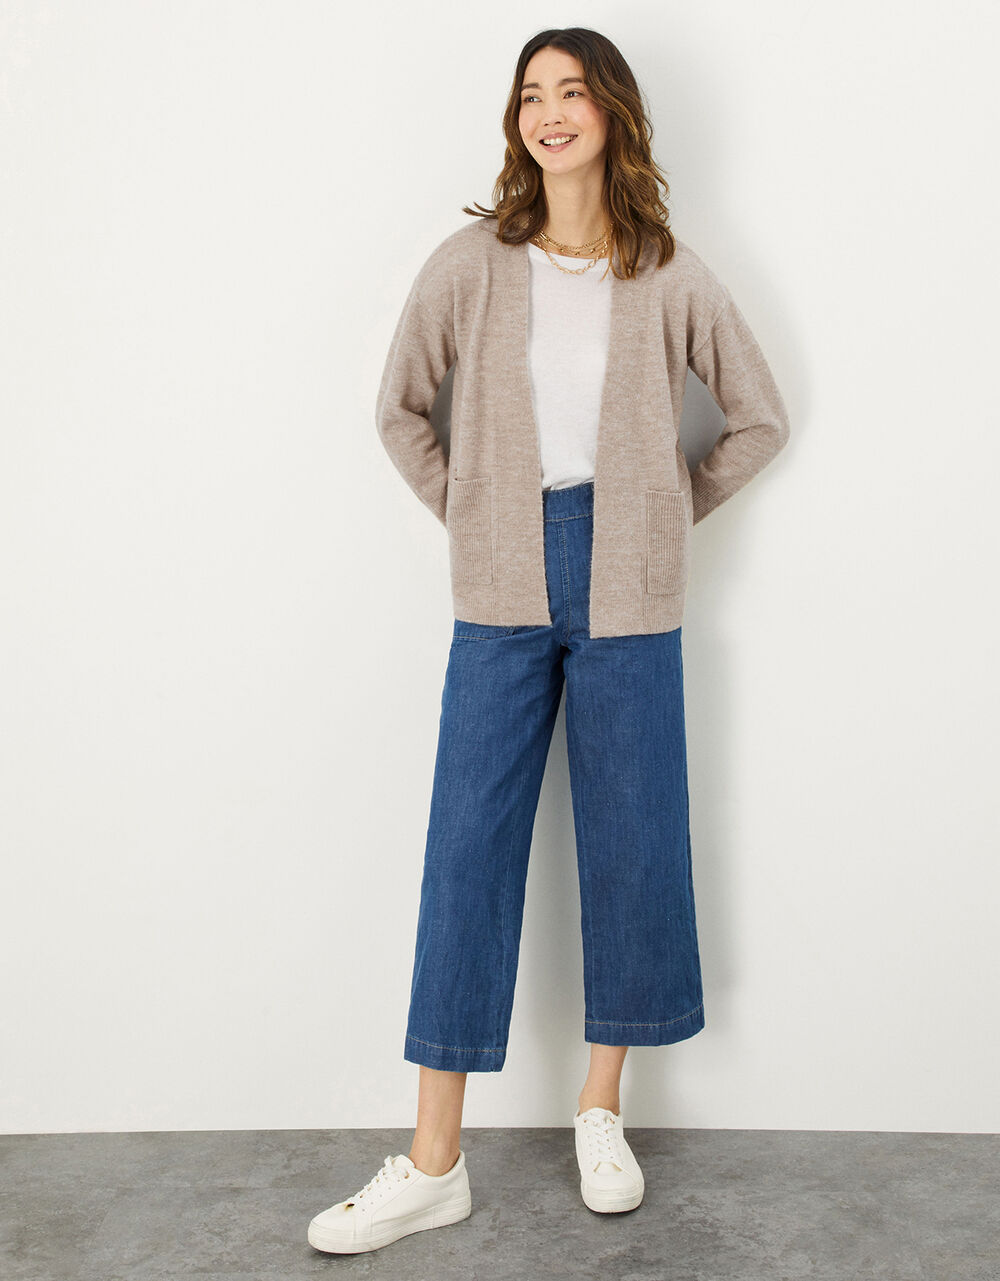 Women Women's Clothing | Lola Pocket Cardigan with Recycled Polyester Camel - WA52999